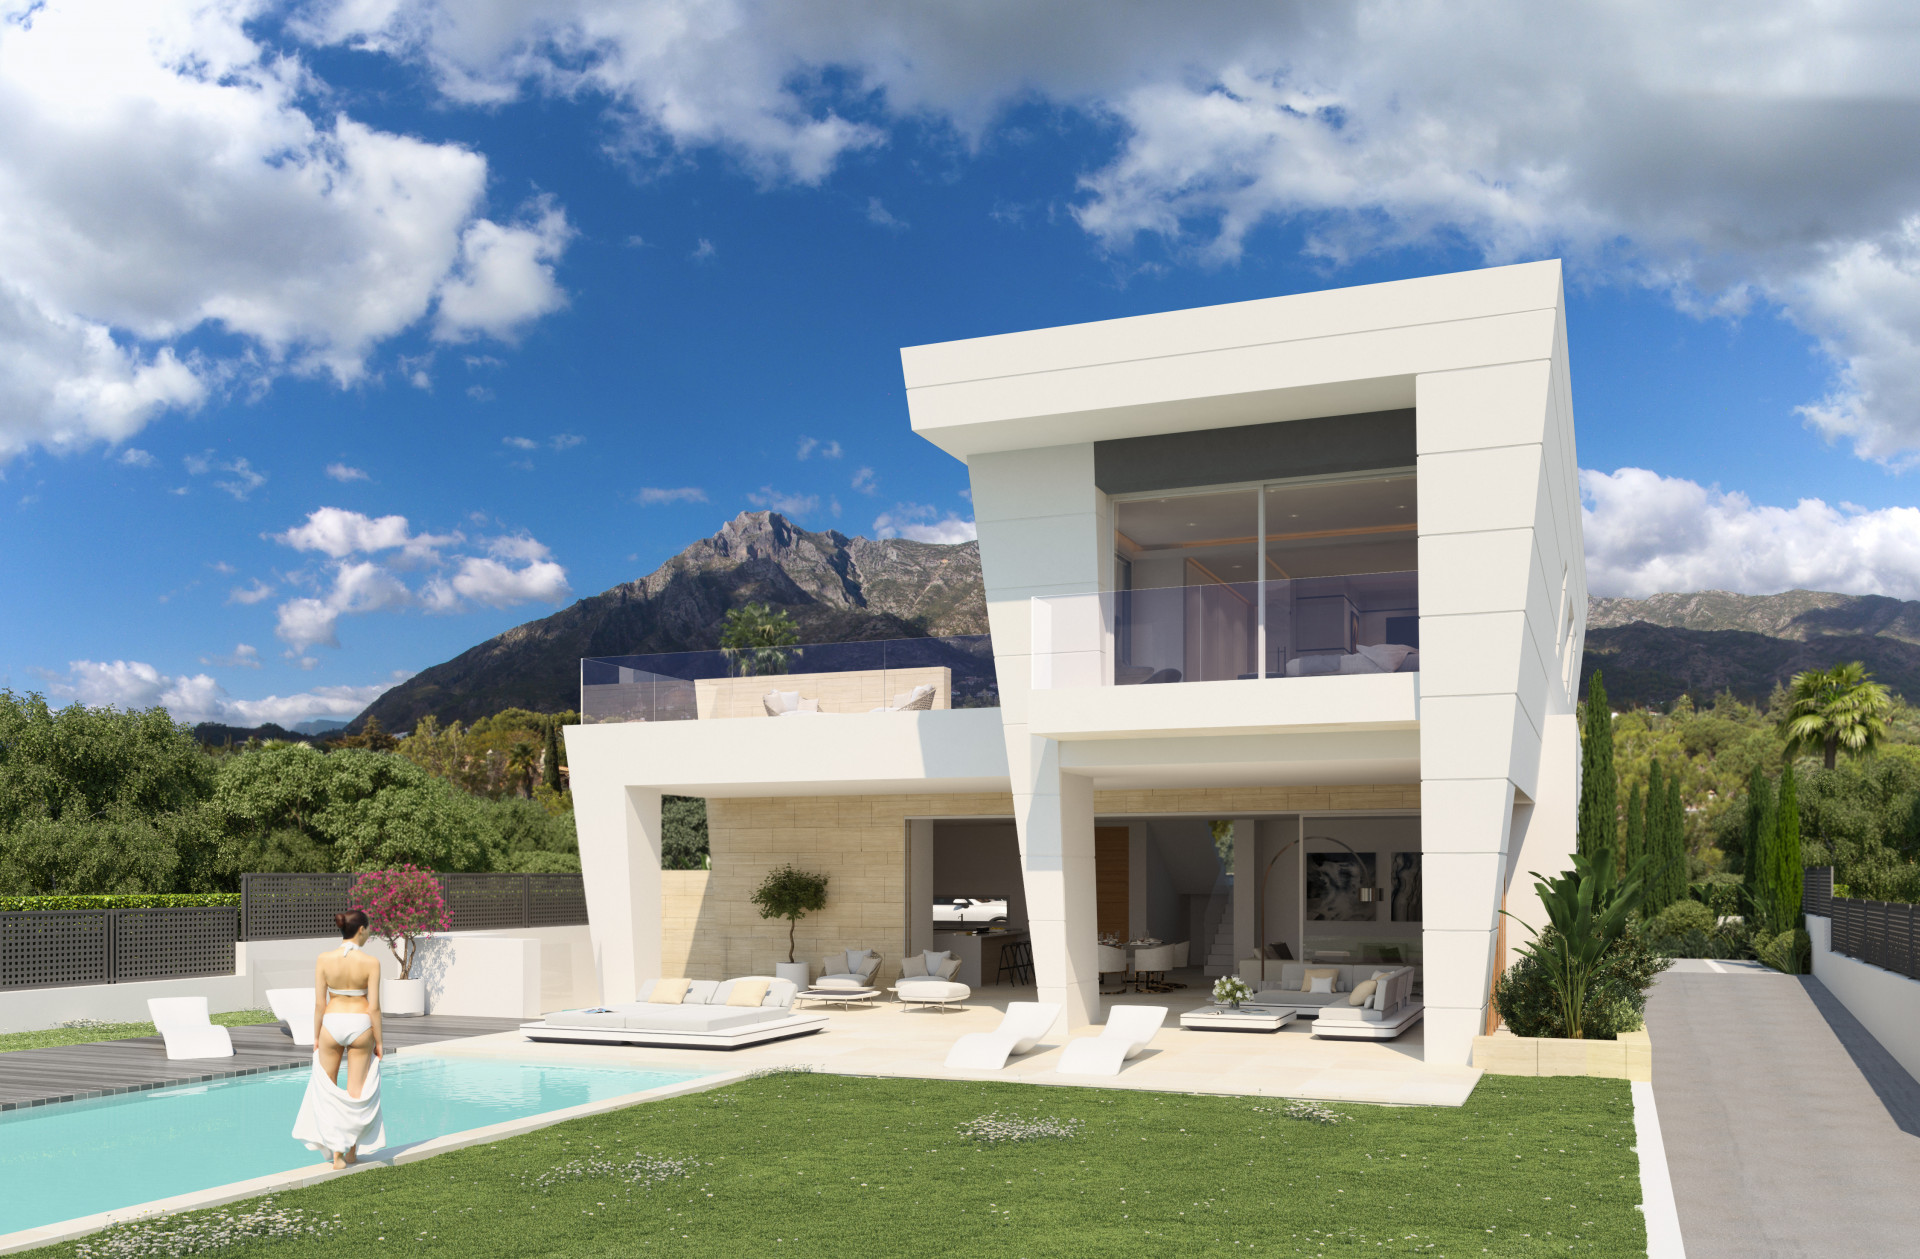 Plot and project for sale in a stunning location of Rocio de Nagueles, Marbella